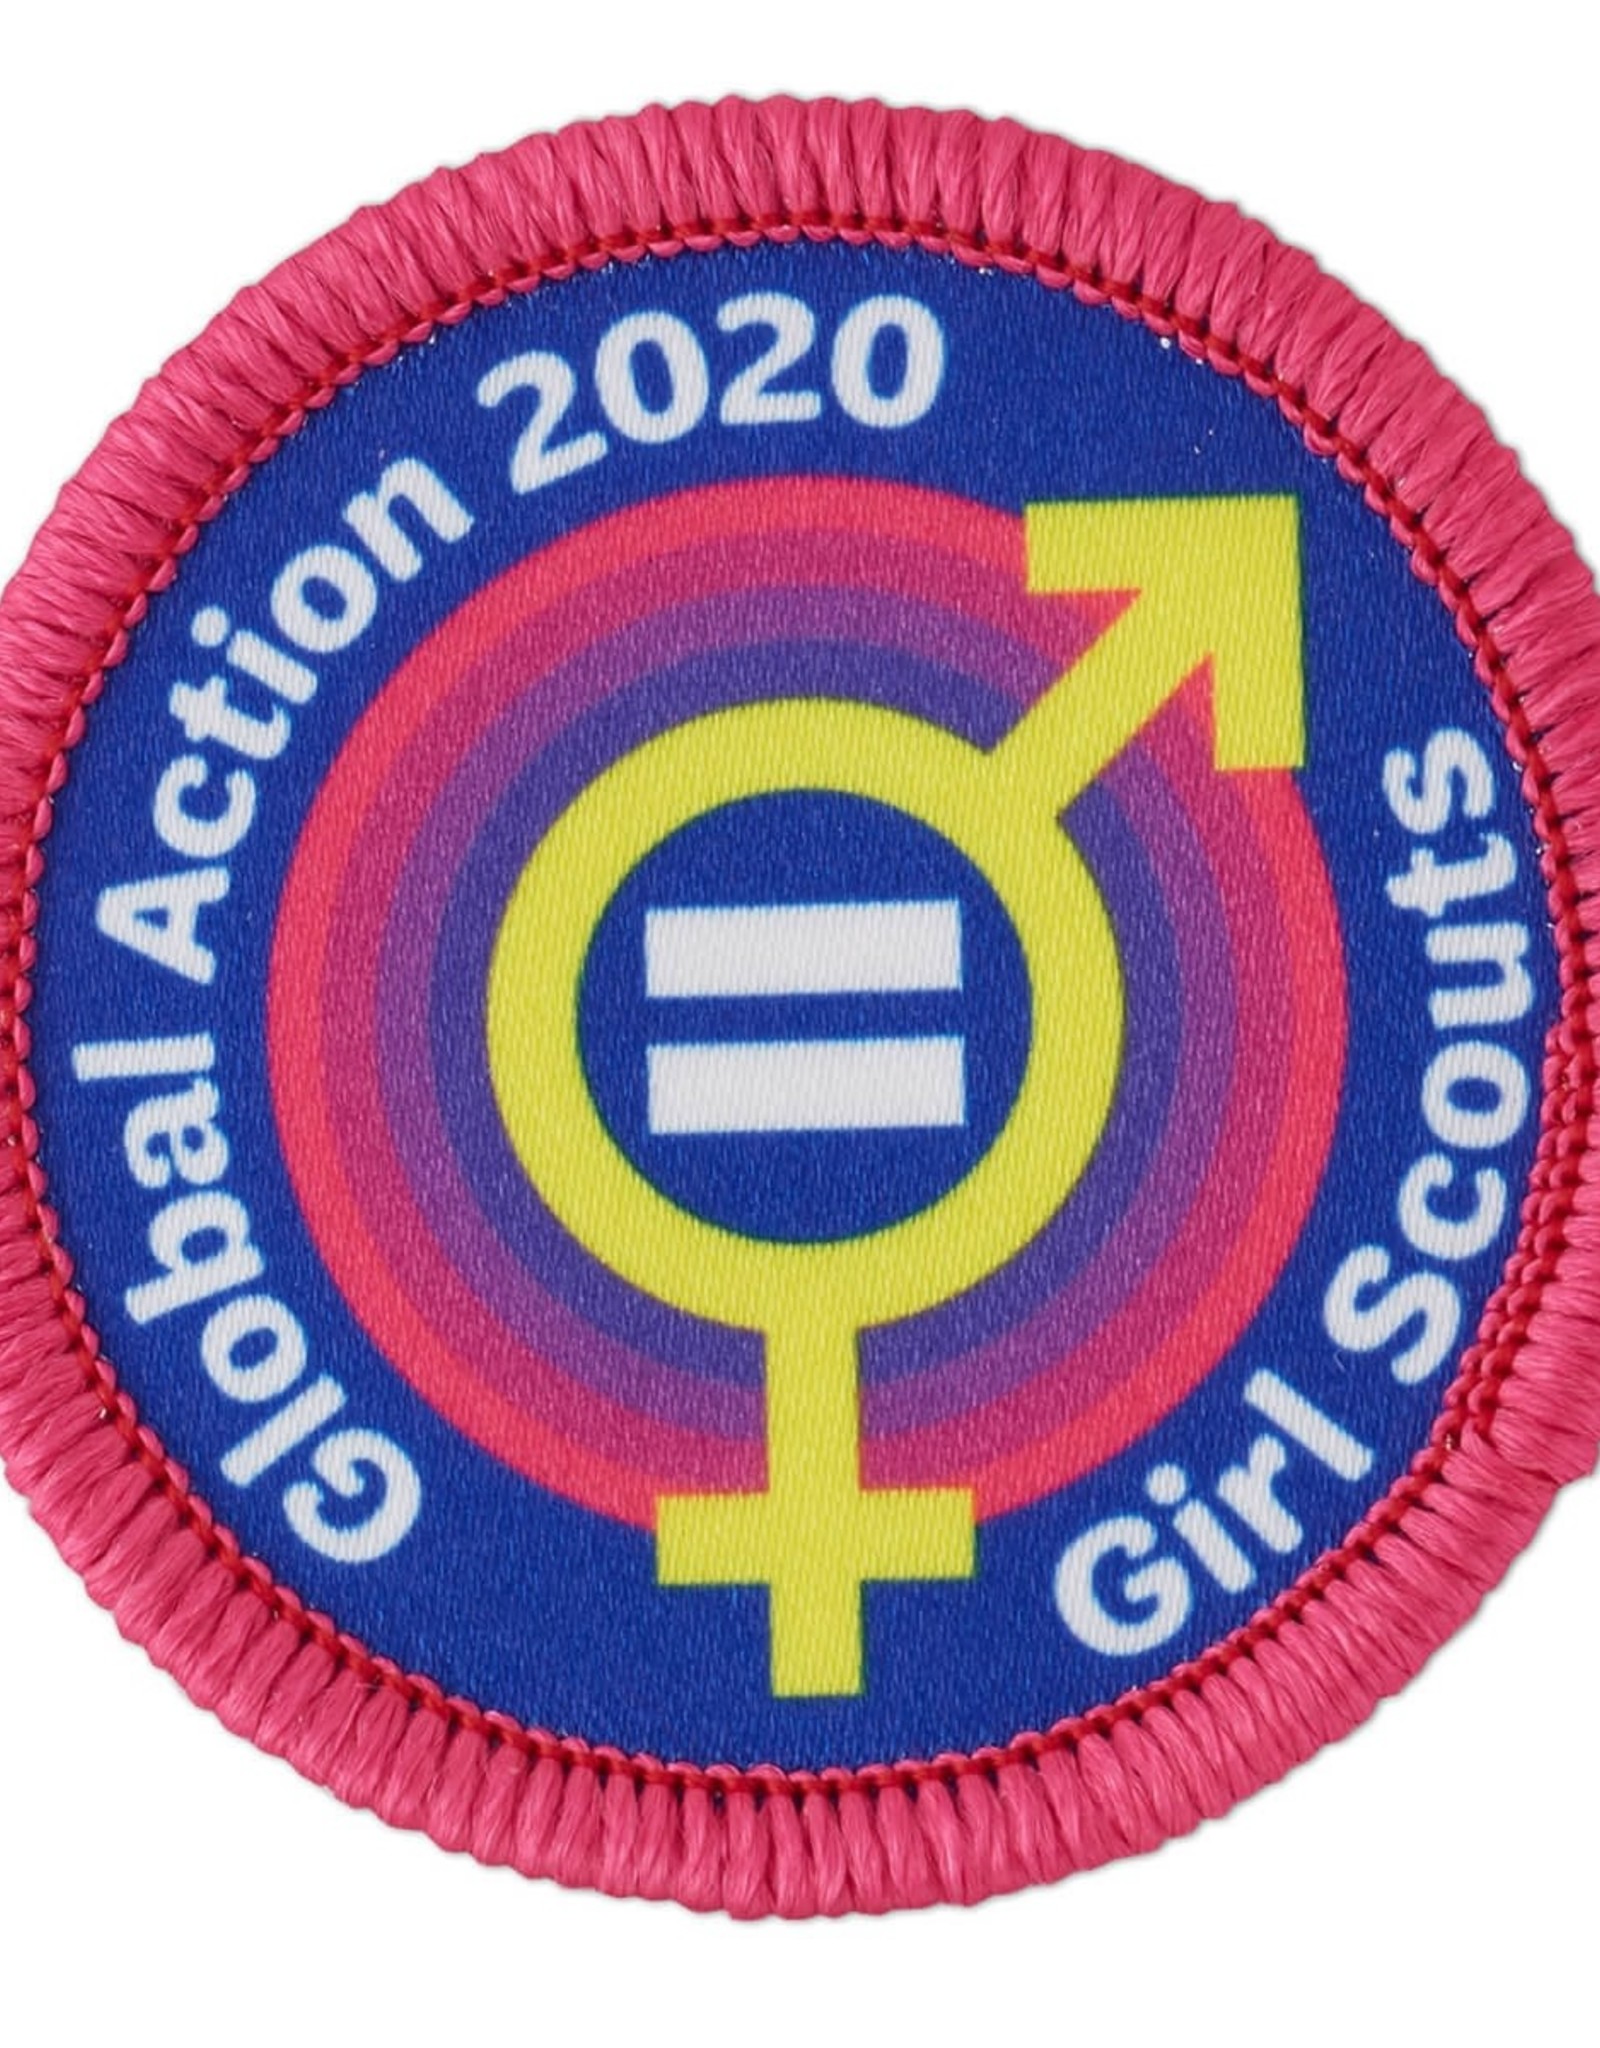 GIRL SCOUTS OF THE USA ! 2020 Global Action Award